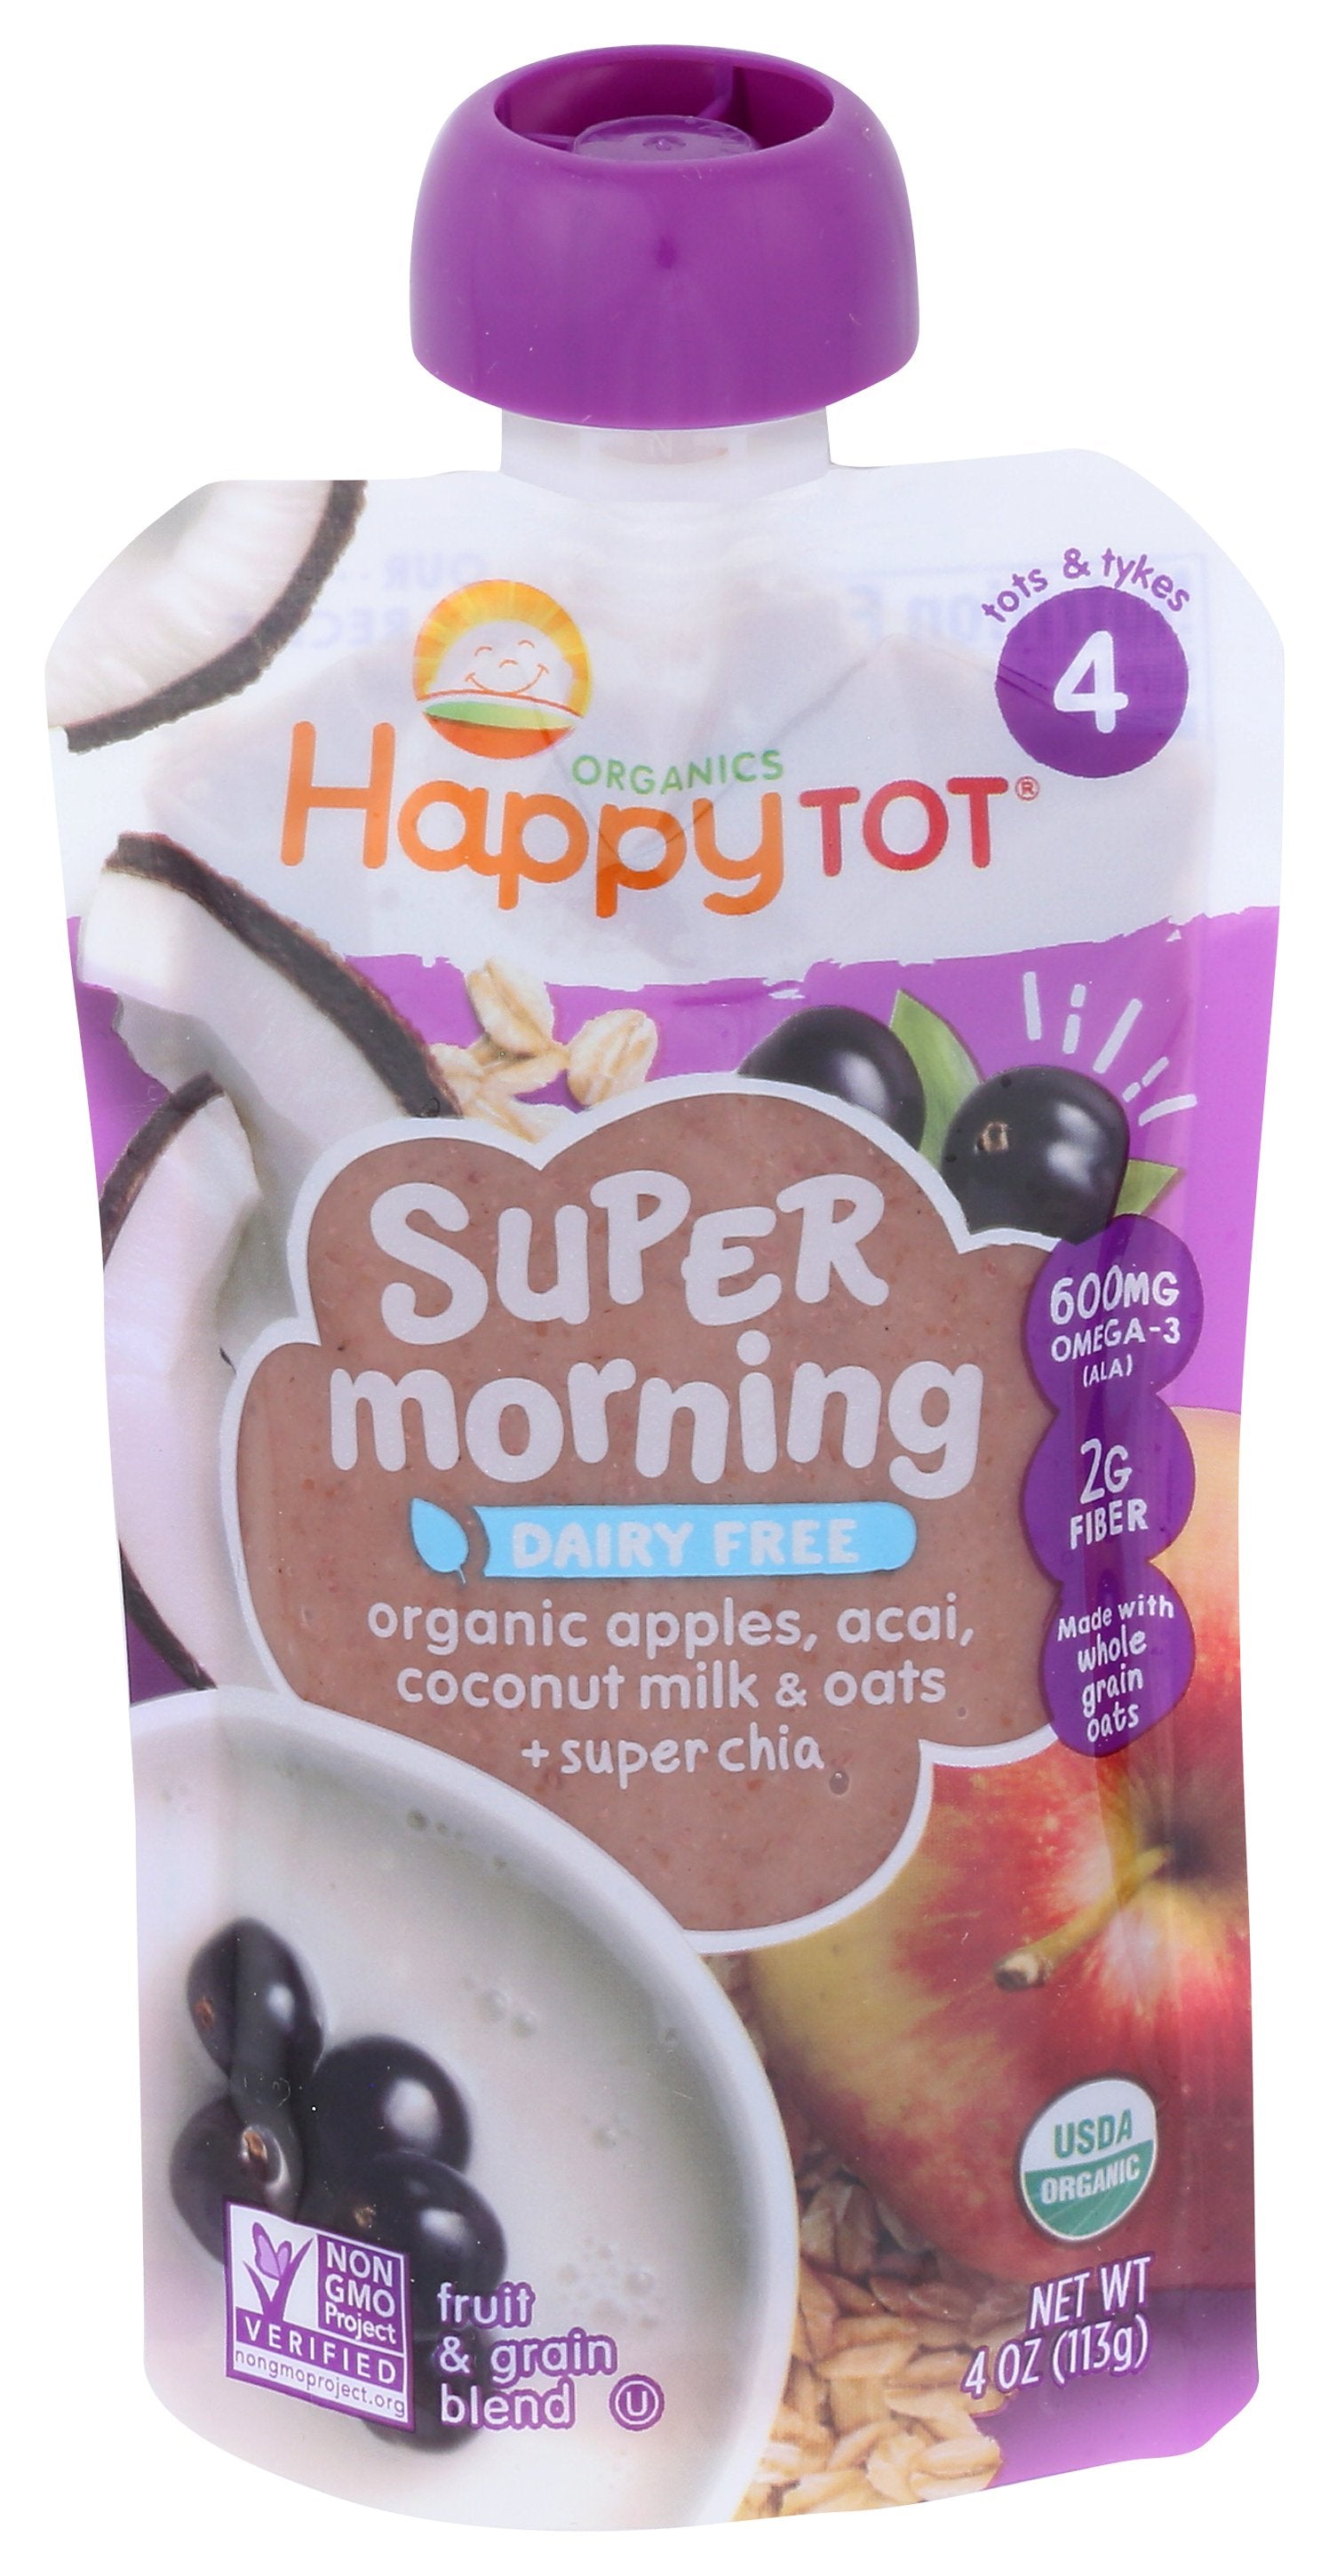 HAPPY TOT POUCH APL ACAI CMLK MORNG - Case of 16